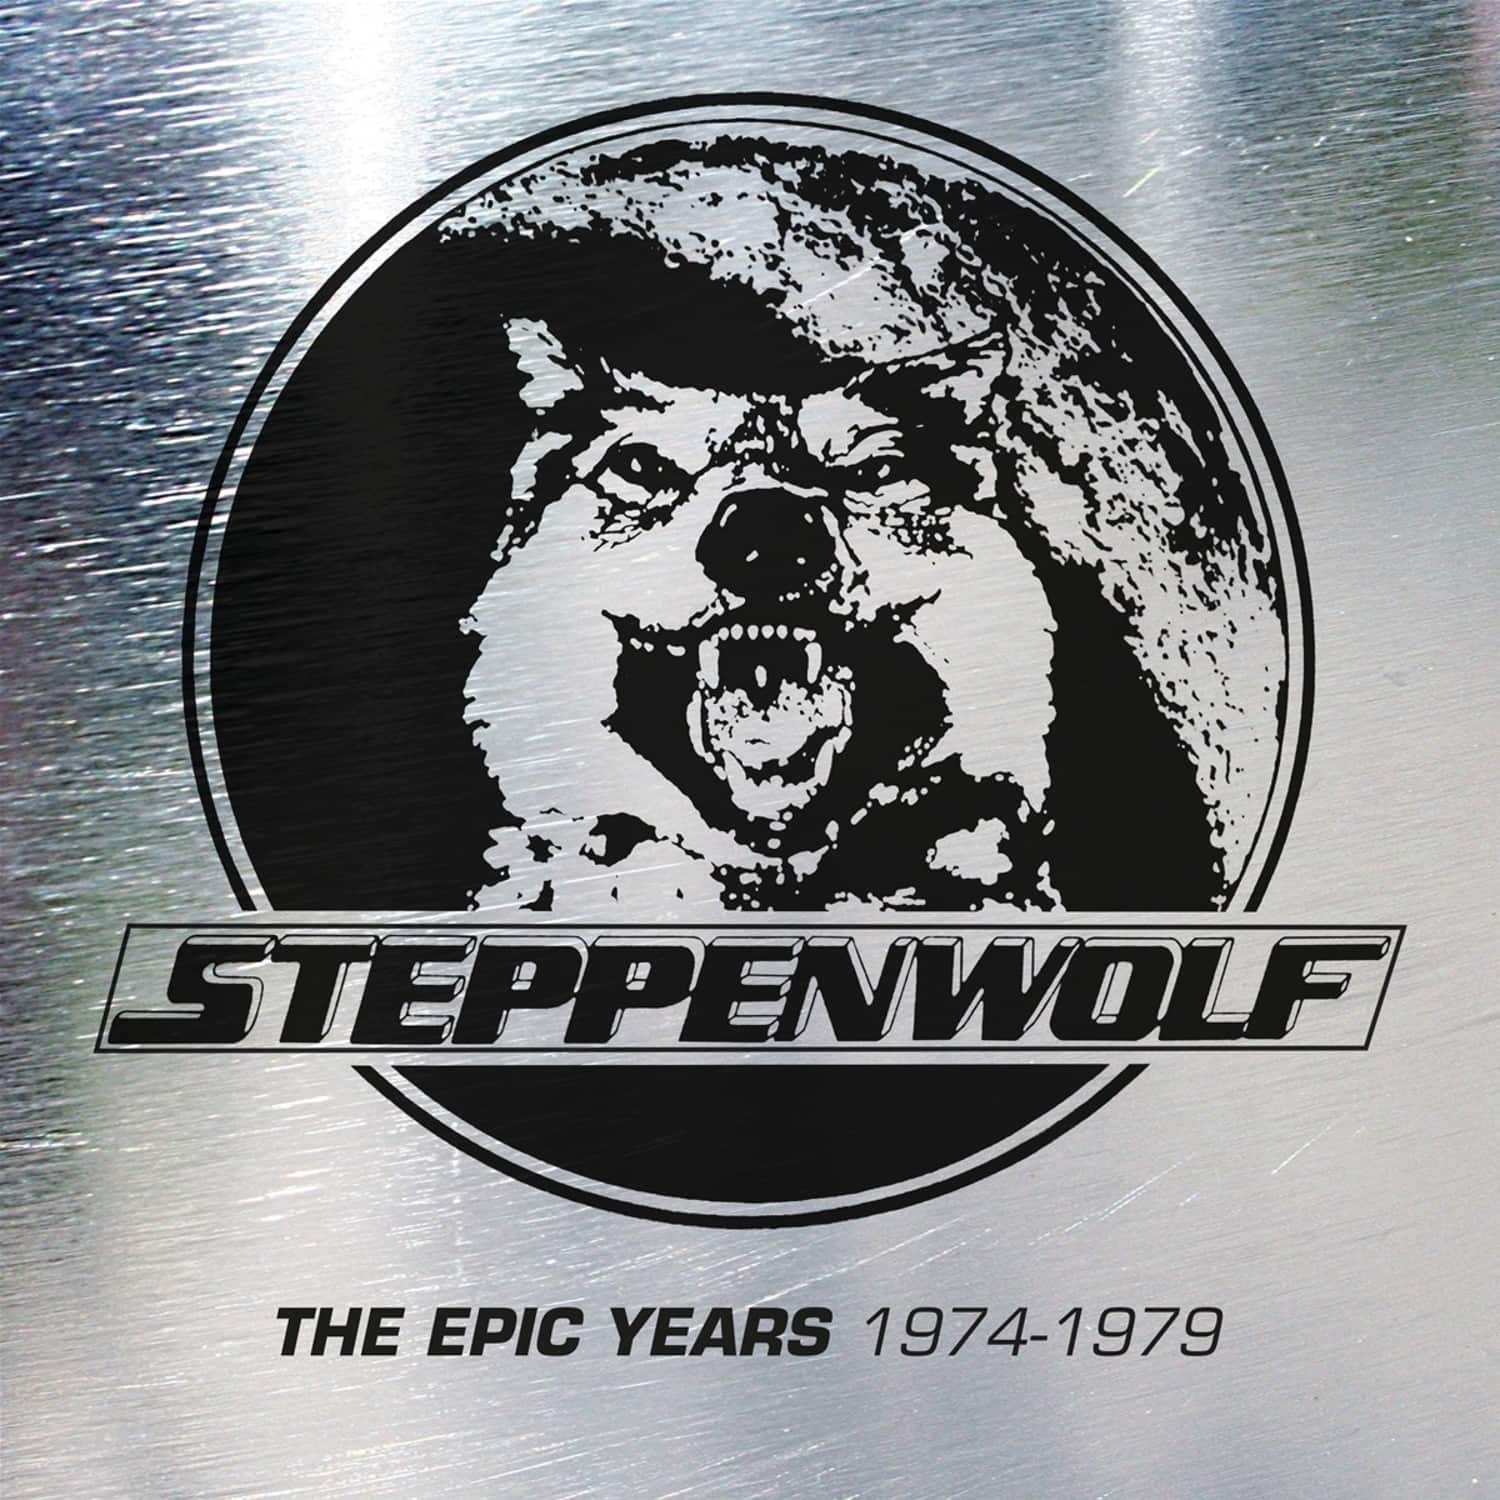 Steppenwolf - THE EPIC YEARS 1974-1979 3CD CLAMSHELL BOX 